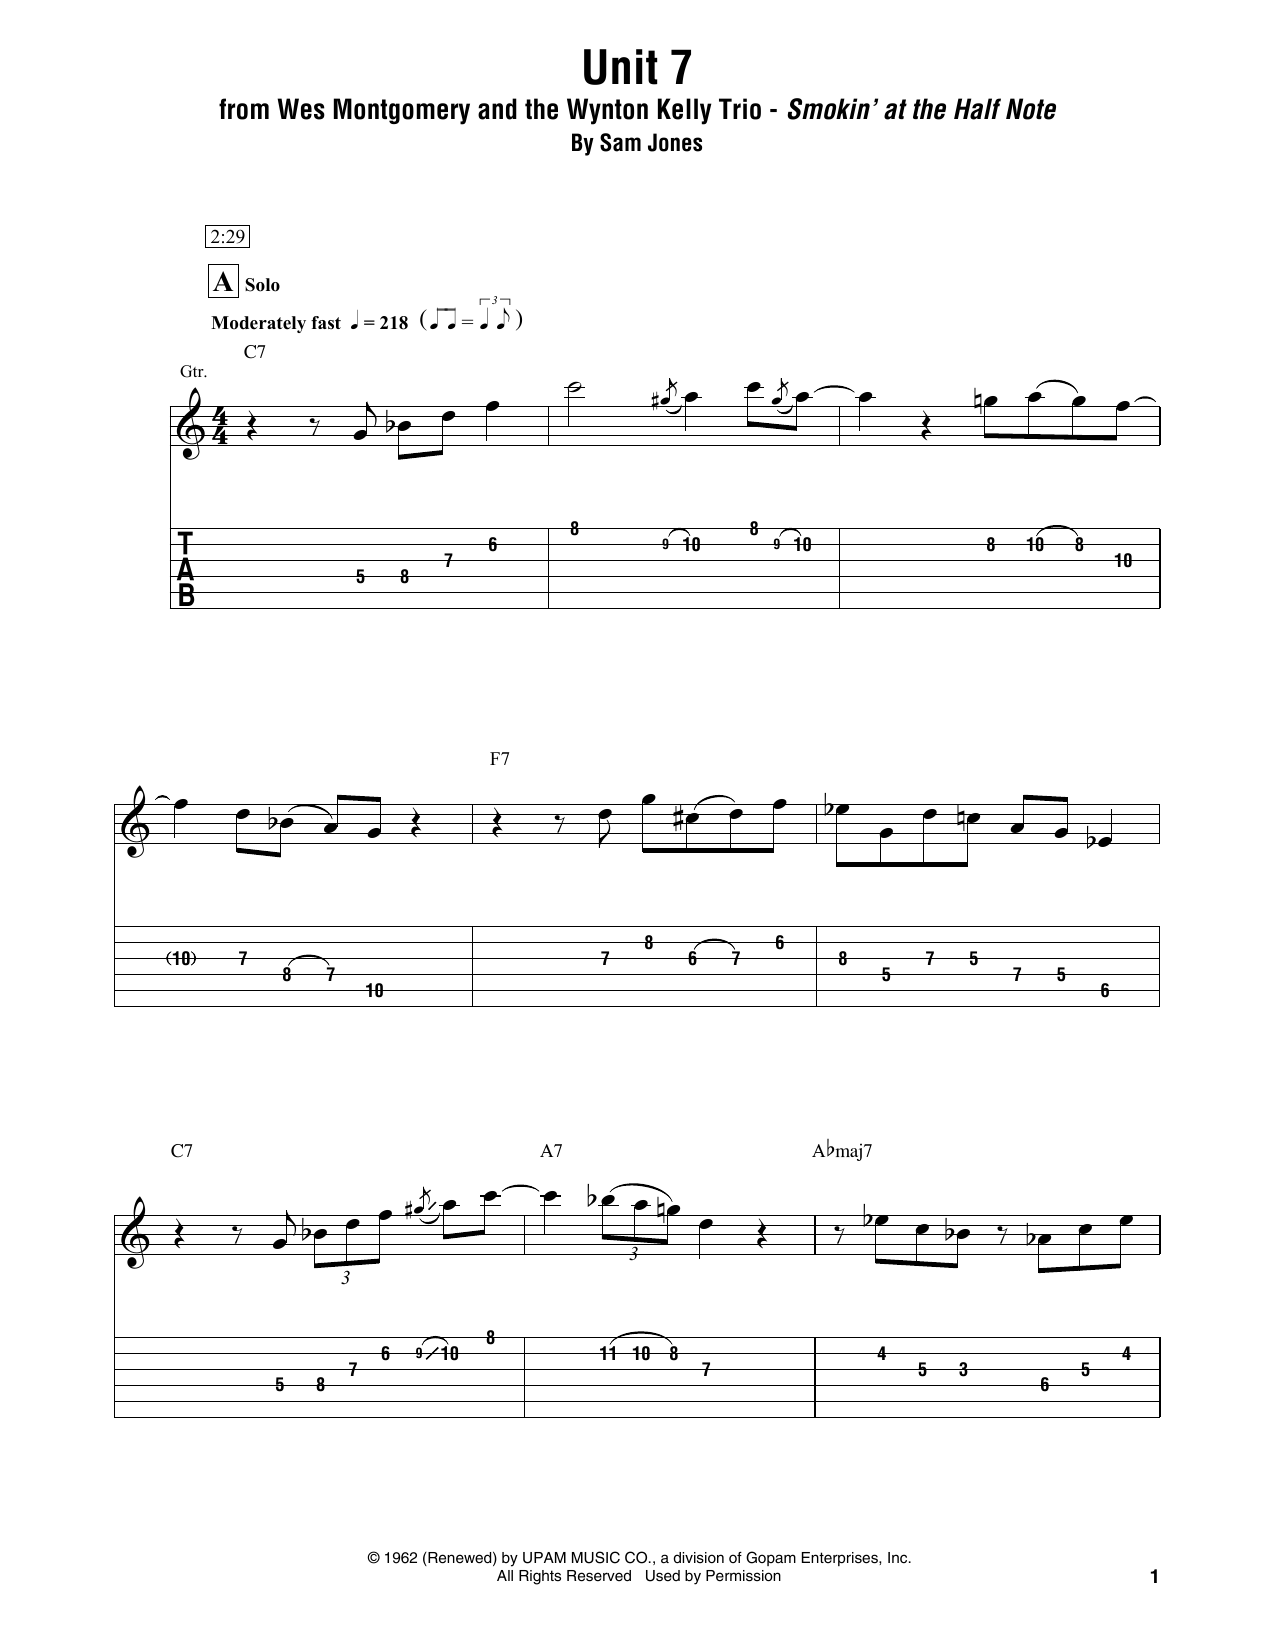 Wes Montgomery and the Wynton Kelly Trio Unit 7 sheet music preview music notes and score for Electric Guitar Transcription including 14 page(s)